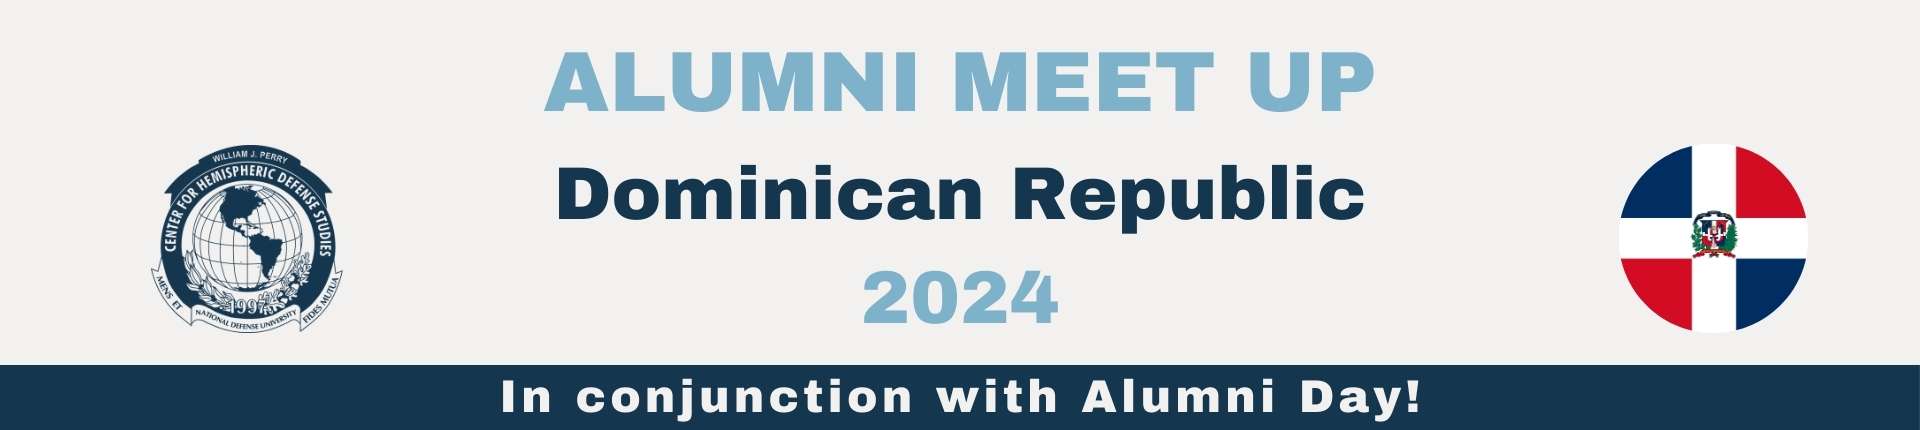 20240321 - Alumni Day in DR [ENG]